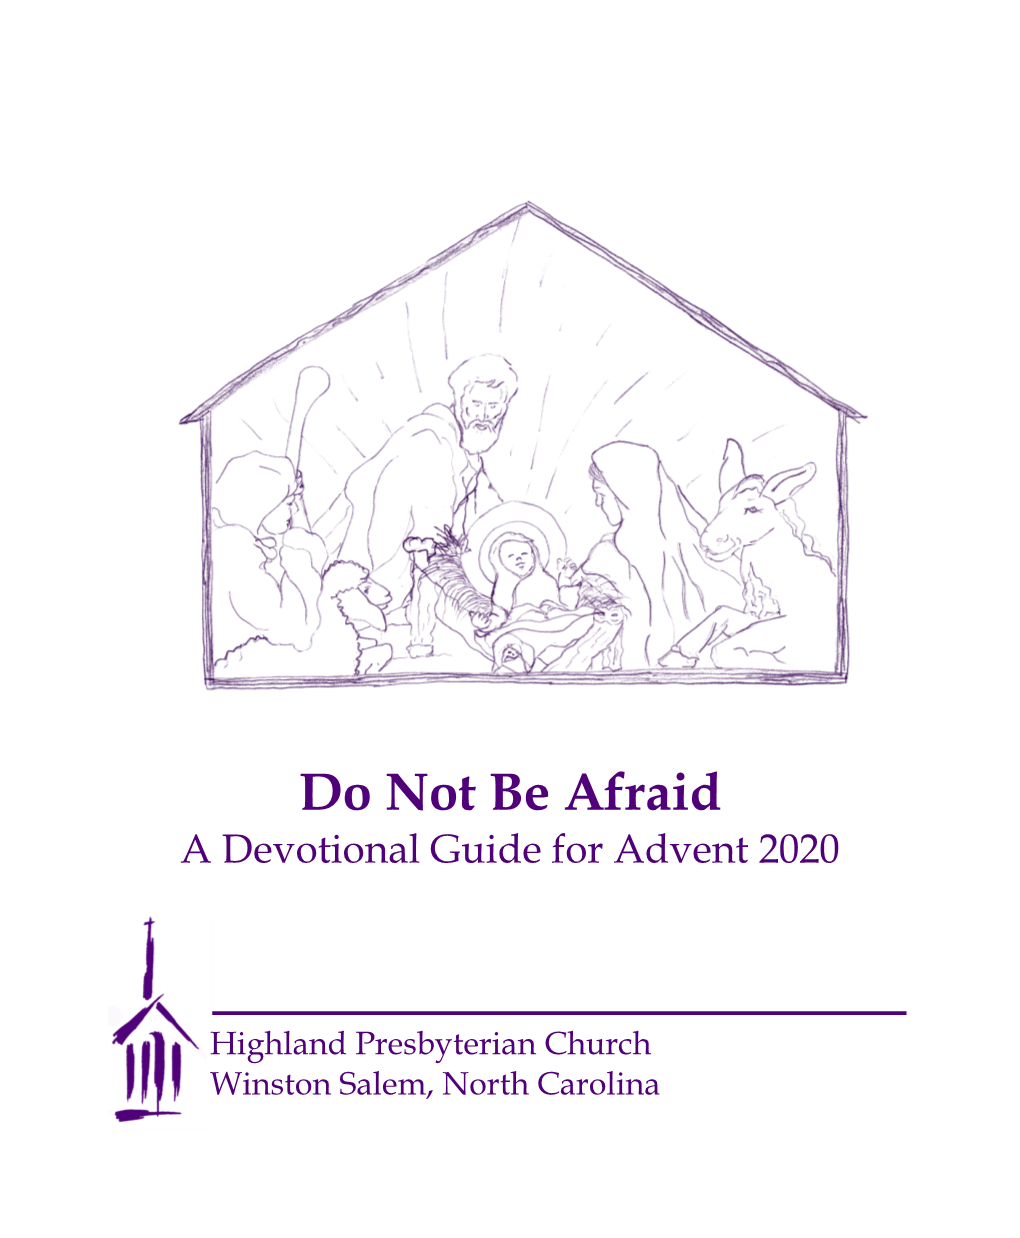 Do Not Be Afraid a Devotional Guide for Advent 2020